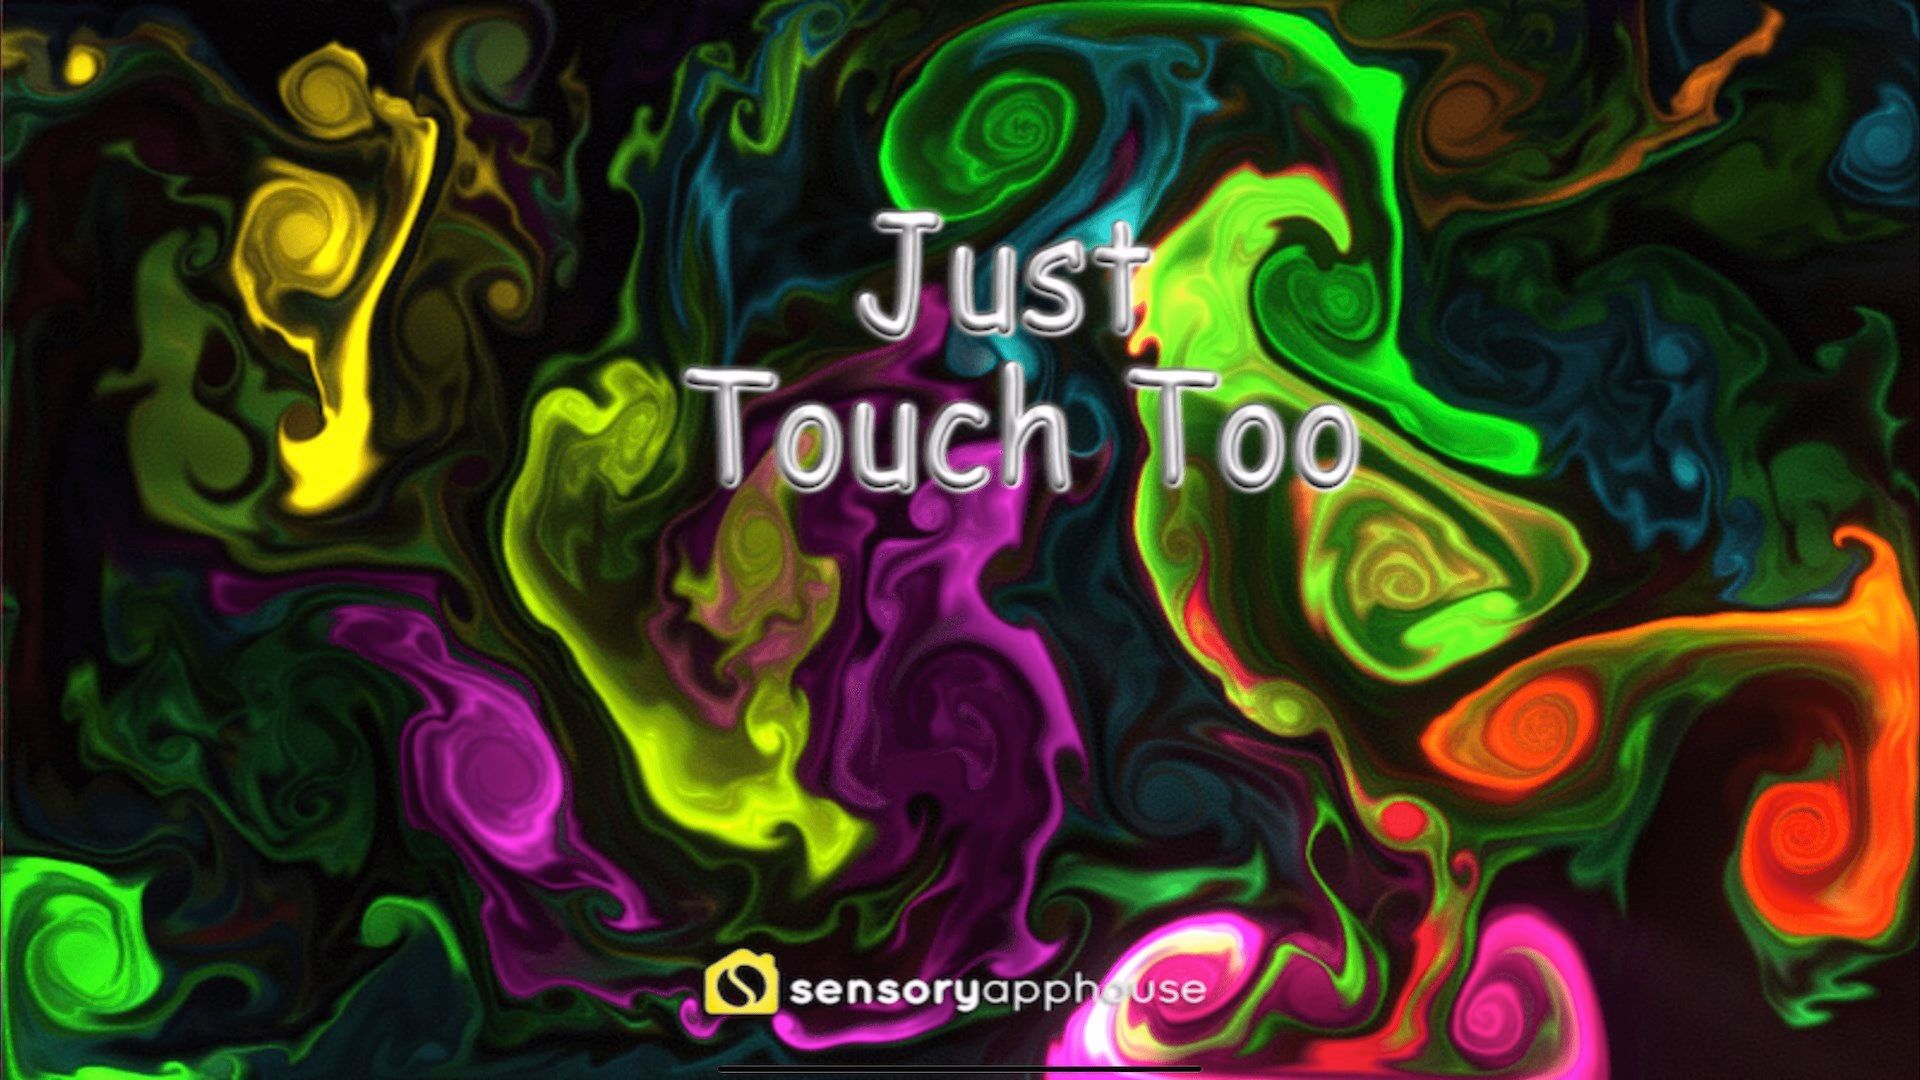 JustTouch Too